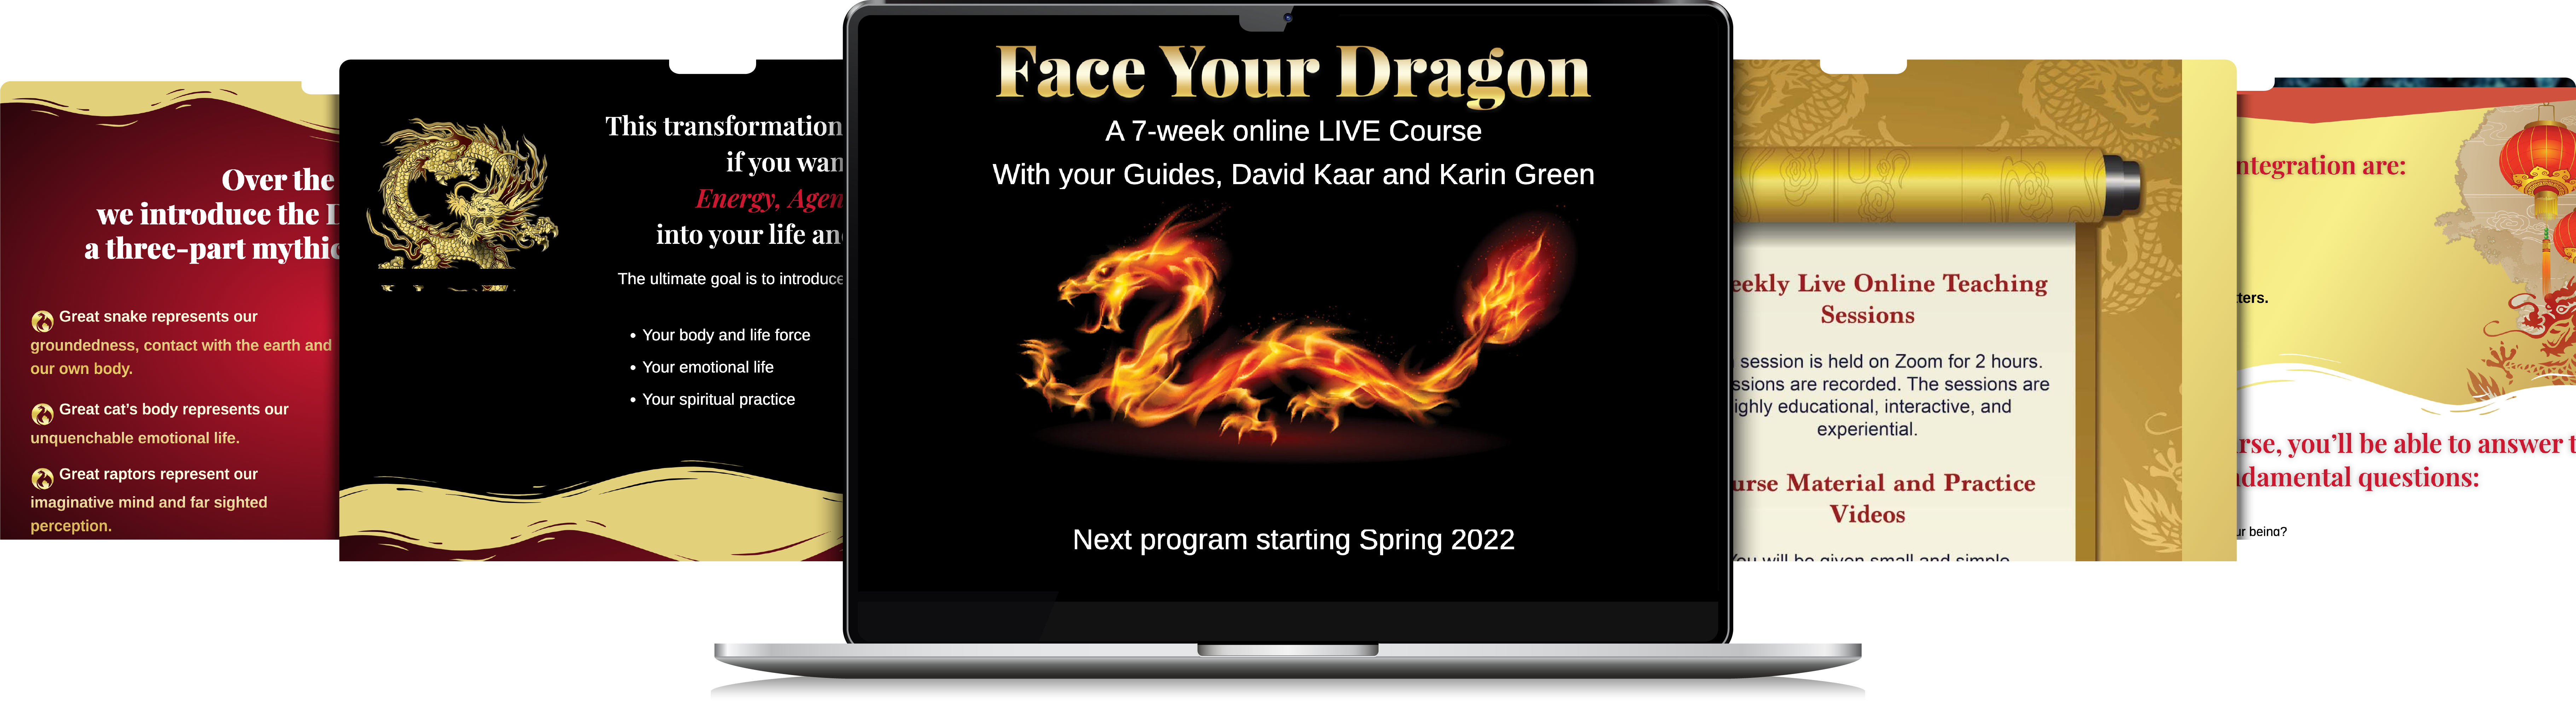 Face Your Dragon Screens